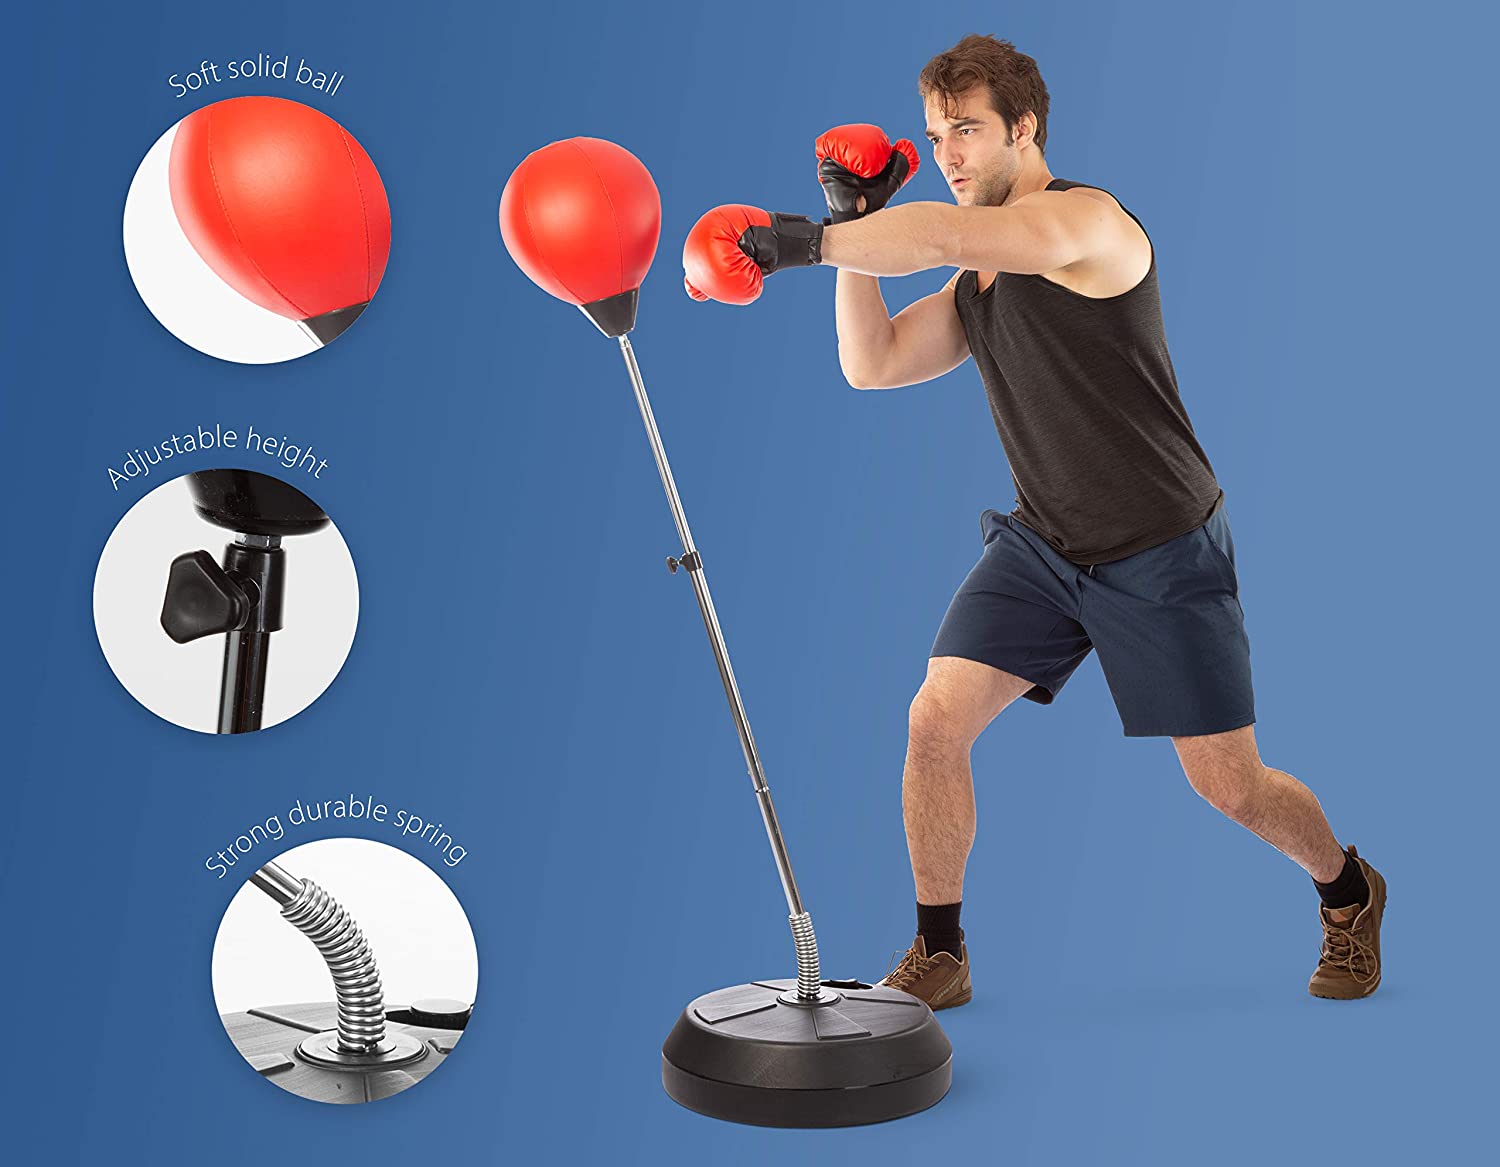 Vobor Adjustable Height Punching Ball Bag Speed Boxing Sports Toys Set ,  Great Exercise & Fun Activity for Stress Relief & Fitness